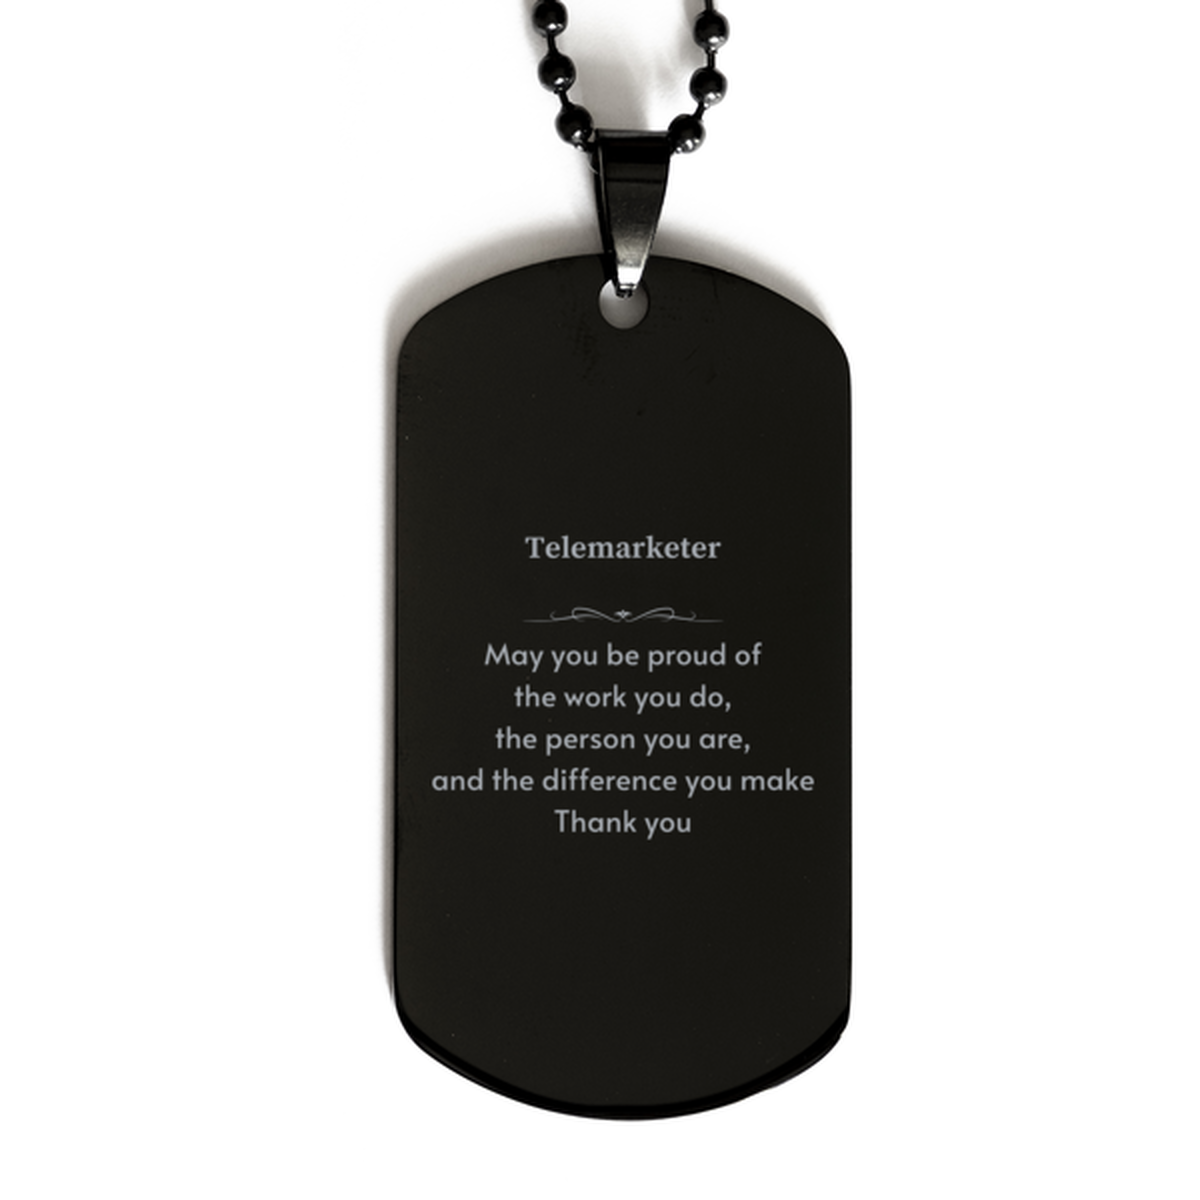 Heartwarming Black Dog Tag Retirement Coworkers Gifts for Telemarketer, Telemarketer May You be proud of the work you do, the person you are Gifts for Boss Men Women Friends